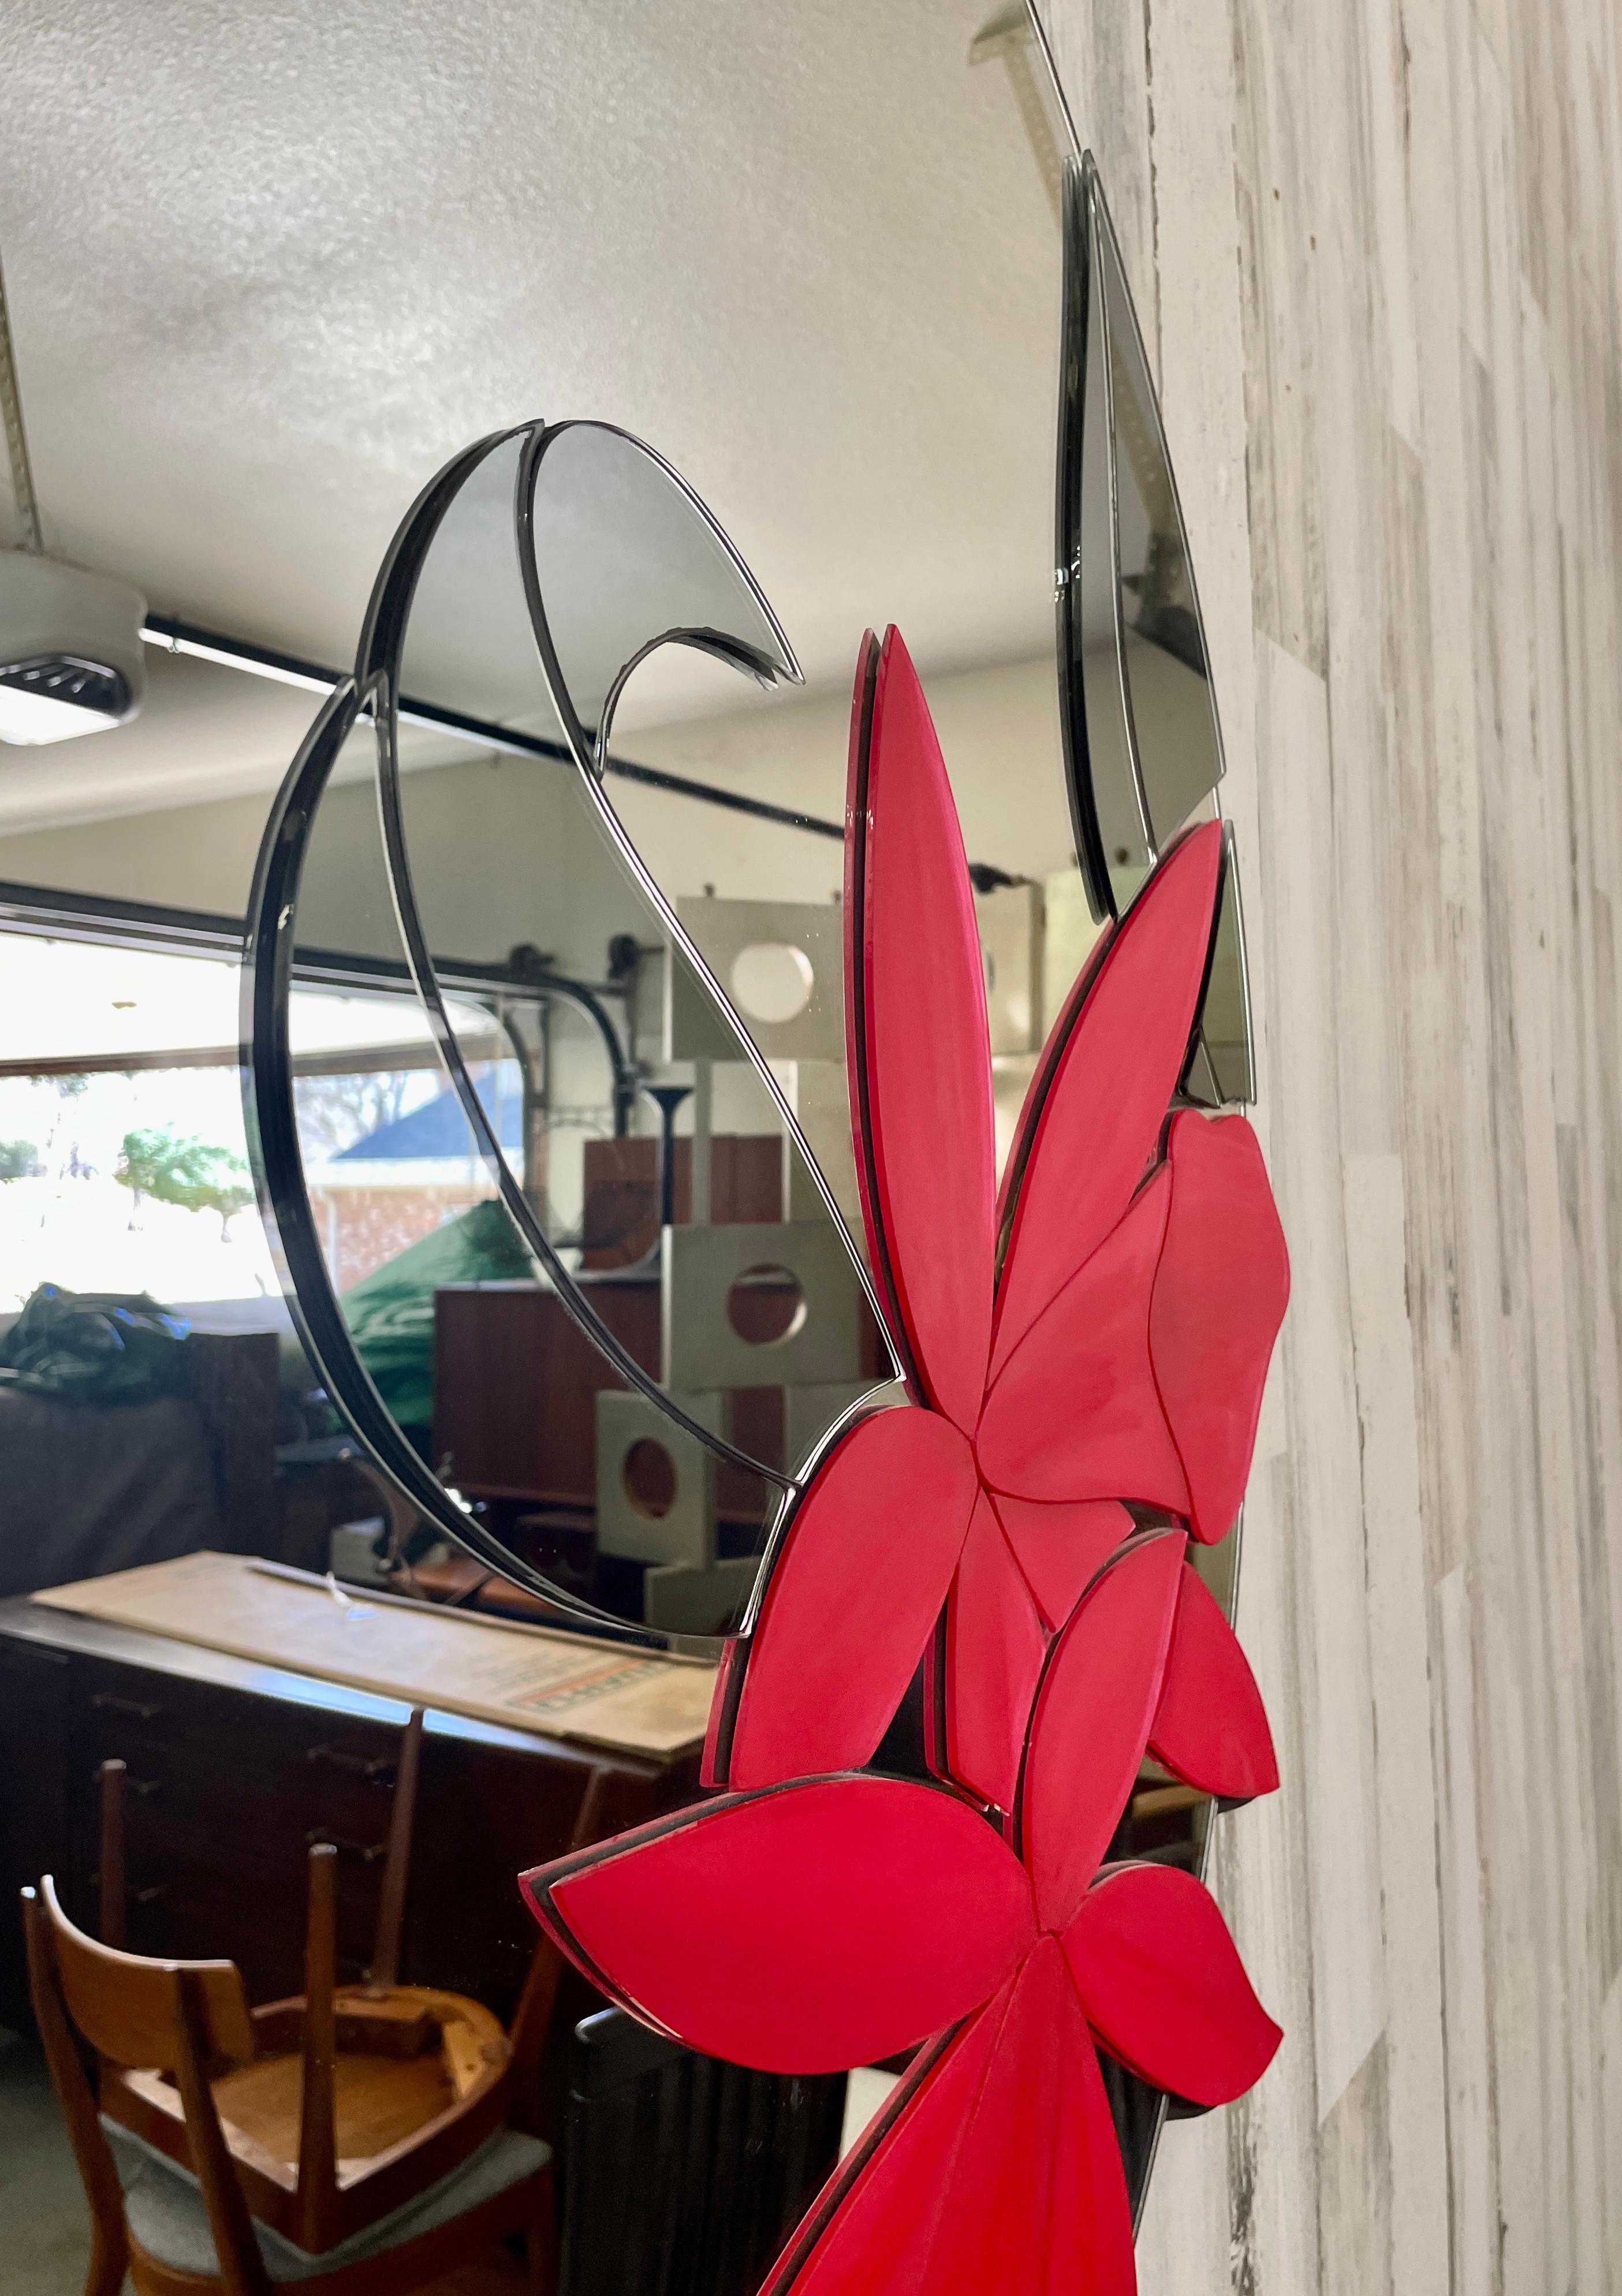 Floral Layered Mirror by David Marshall In Good Condition For Sale In Denton, TX